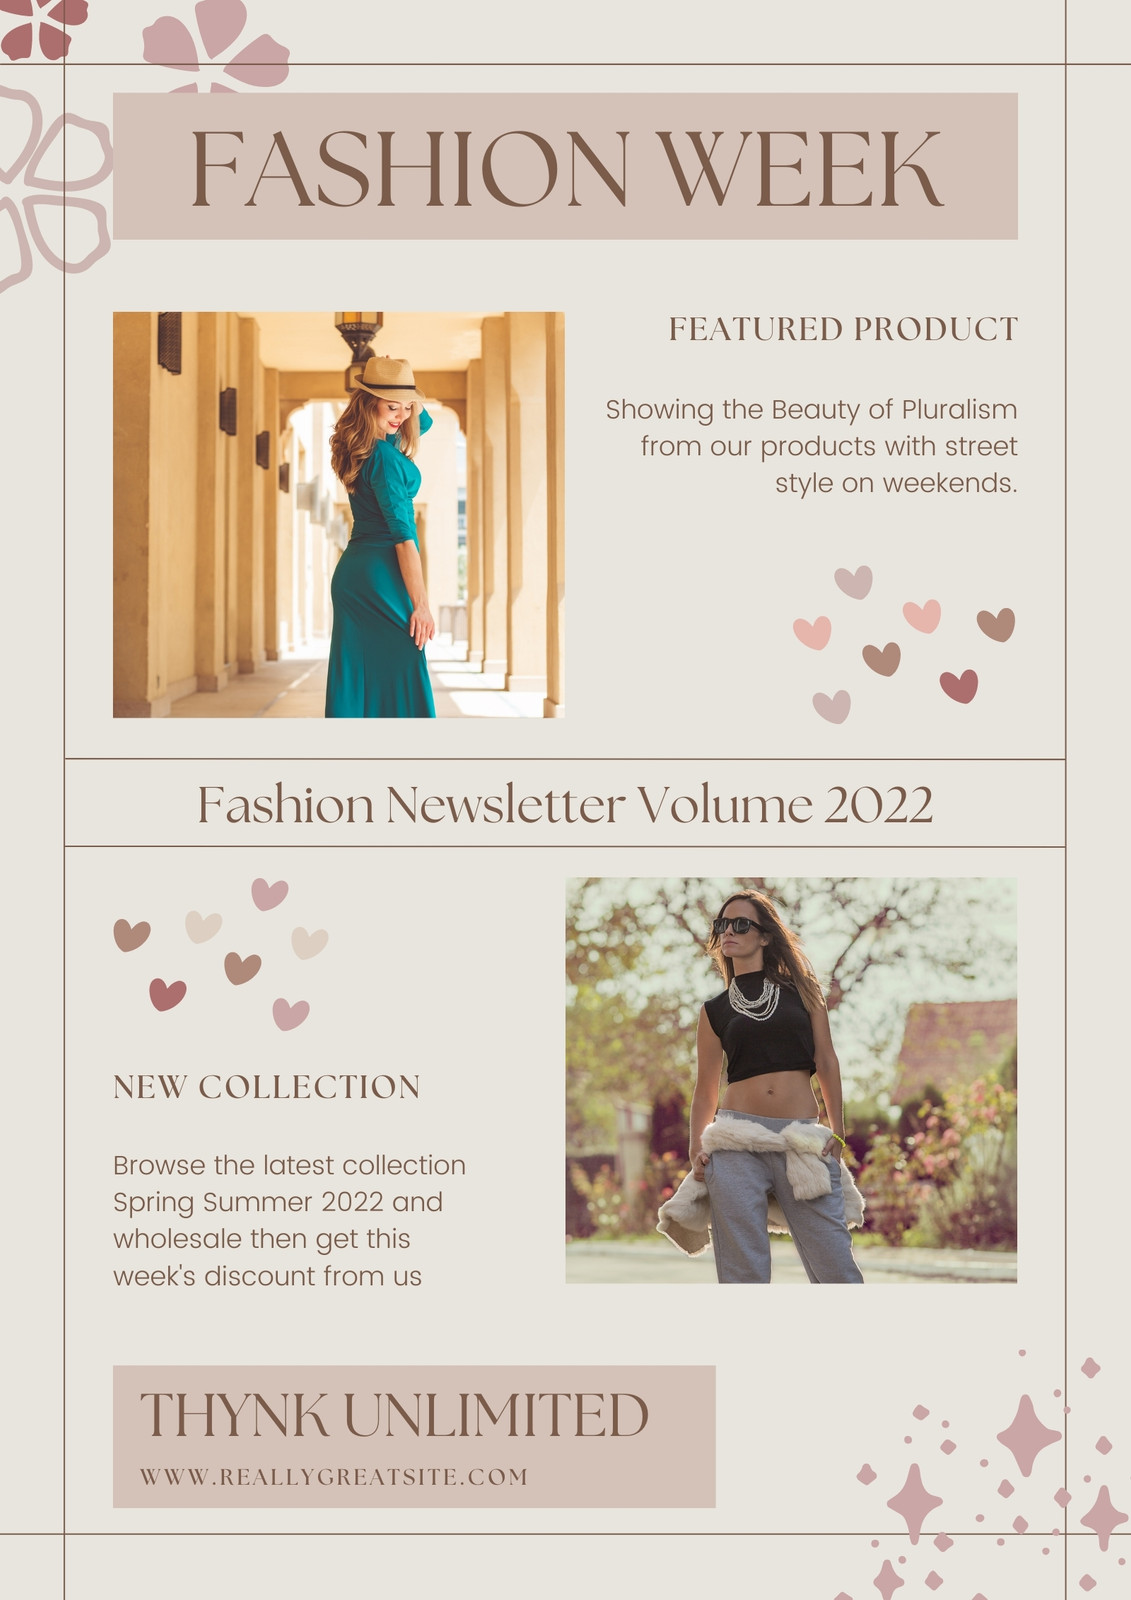 Page 9 - Free and customizable professional newsletter templates